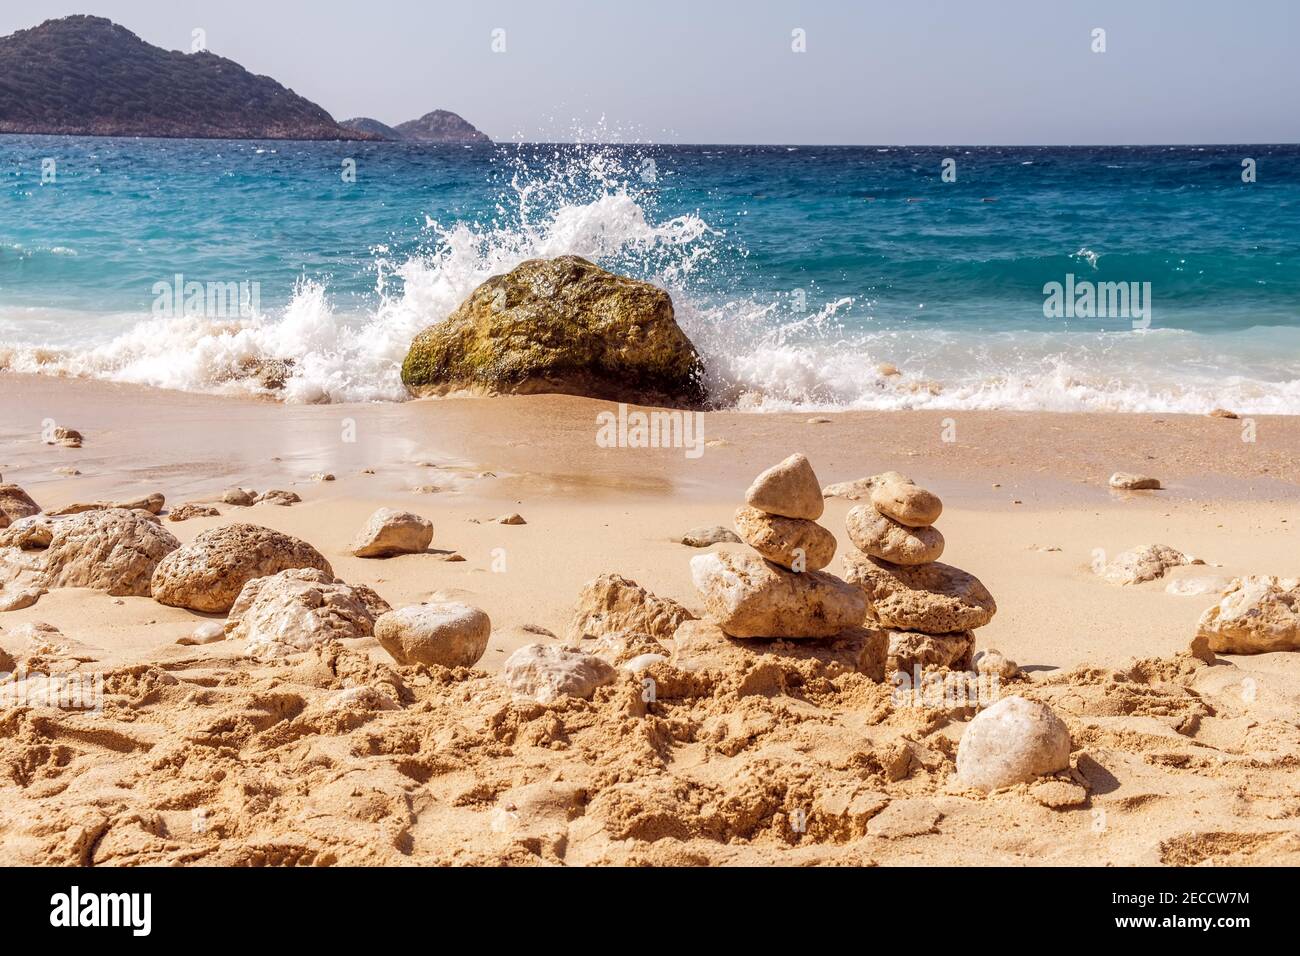 Summer landscape, waves with brakes break on a stone, a cairn of stones in the sand, Kaputas beach, Turkey. Stock Photo